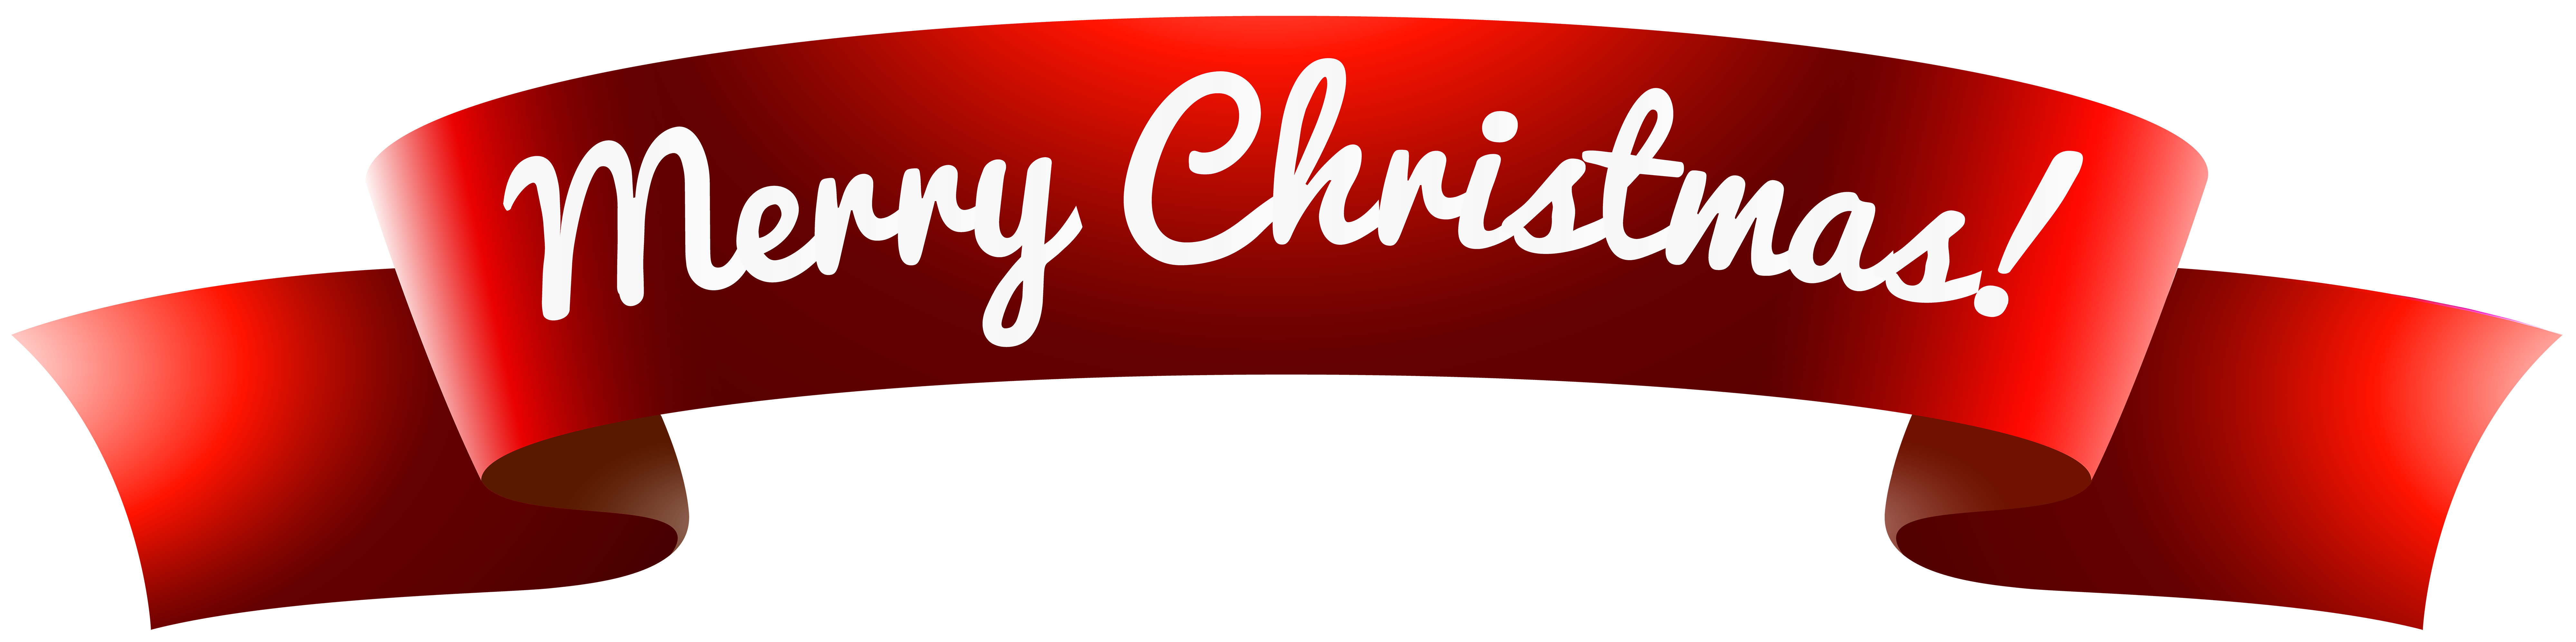 Banner Merry Christmas PNG Clip Art Image | Gallery Yopriceville - High ...